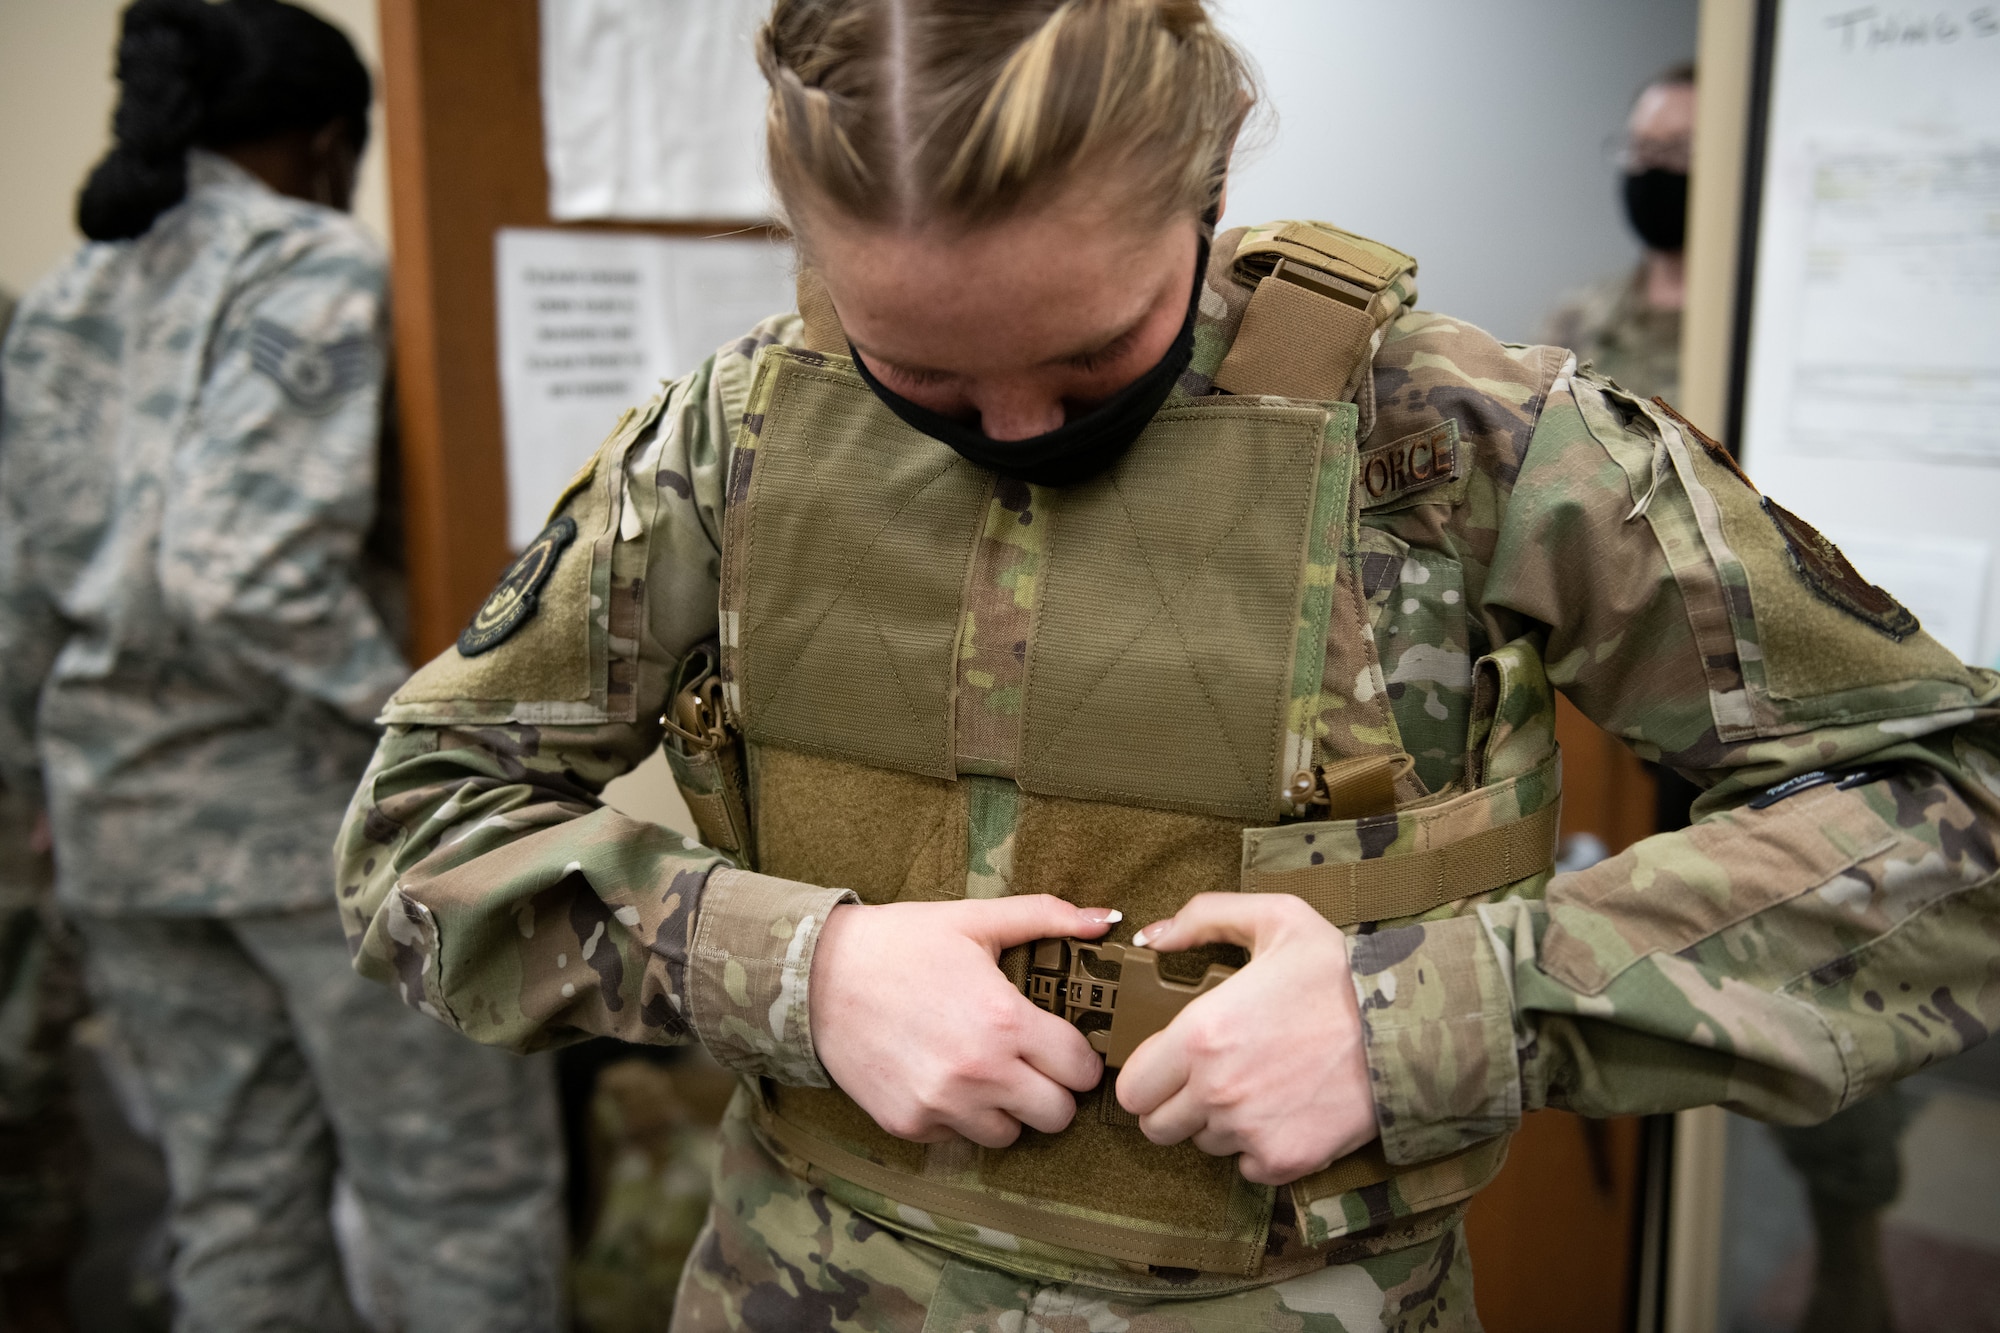 Airman Grace Bailey, a 28th Security Forces Squadron response force leader, clips on the Aspetto Mach V Female Body Armor (FBA) system for the first time at Ellsworth Air Force Base, S.D., March 2, 2021. The new armor aids in reducing injury and allows more flexibility with equipment carriage during combat operations. (U.S. Air Force photo by Staff Sgt. Hannah Malone)